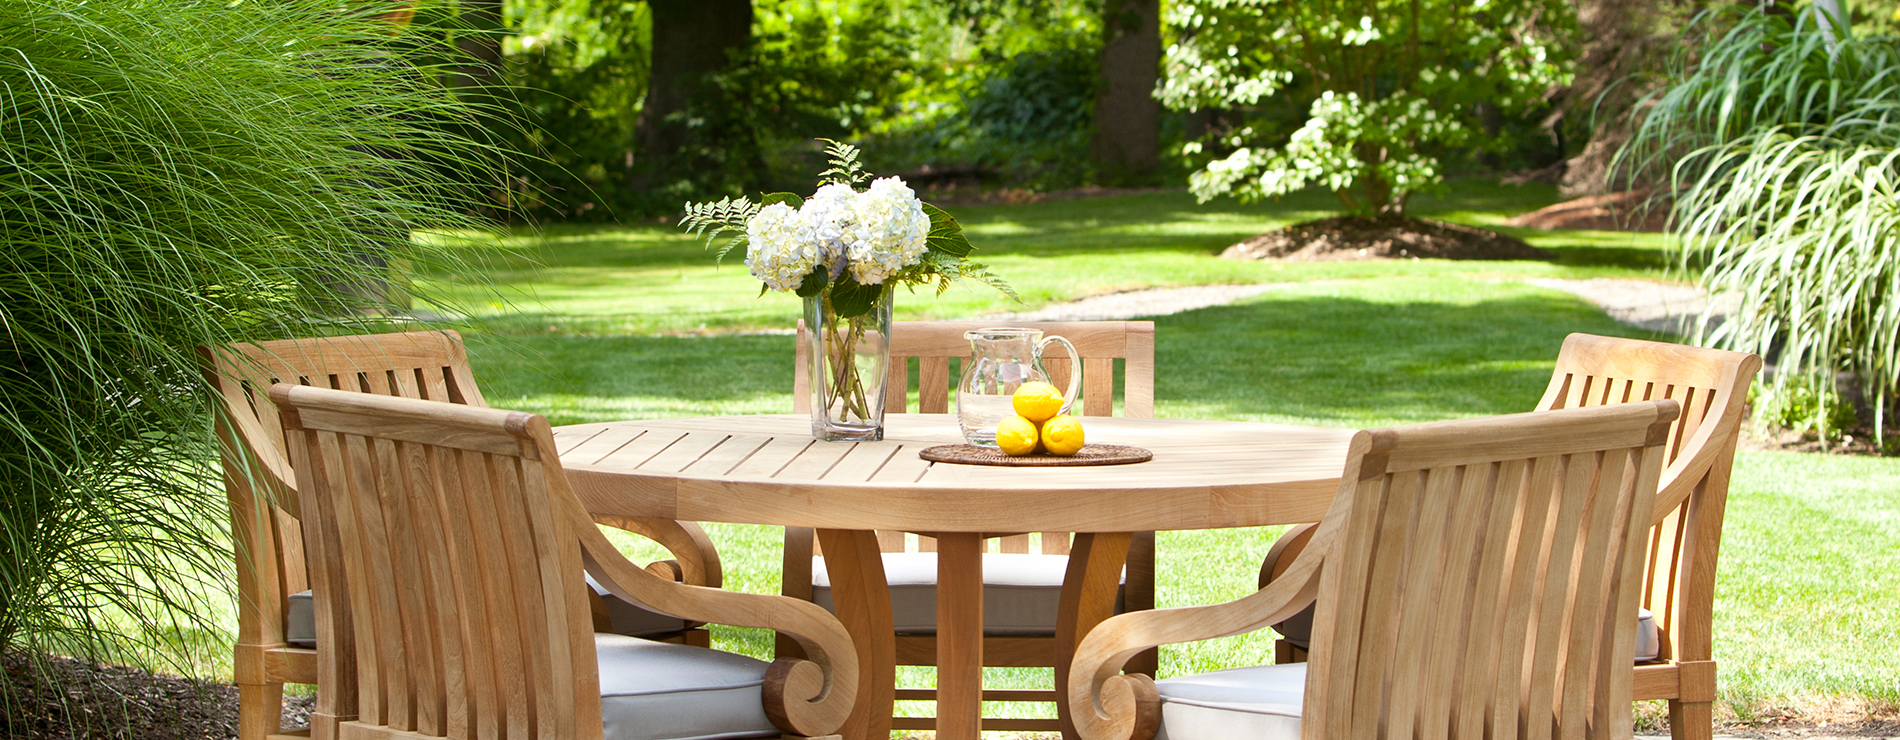 outdoor wood dining table and chairs